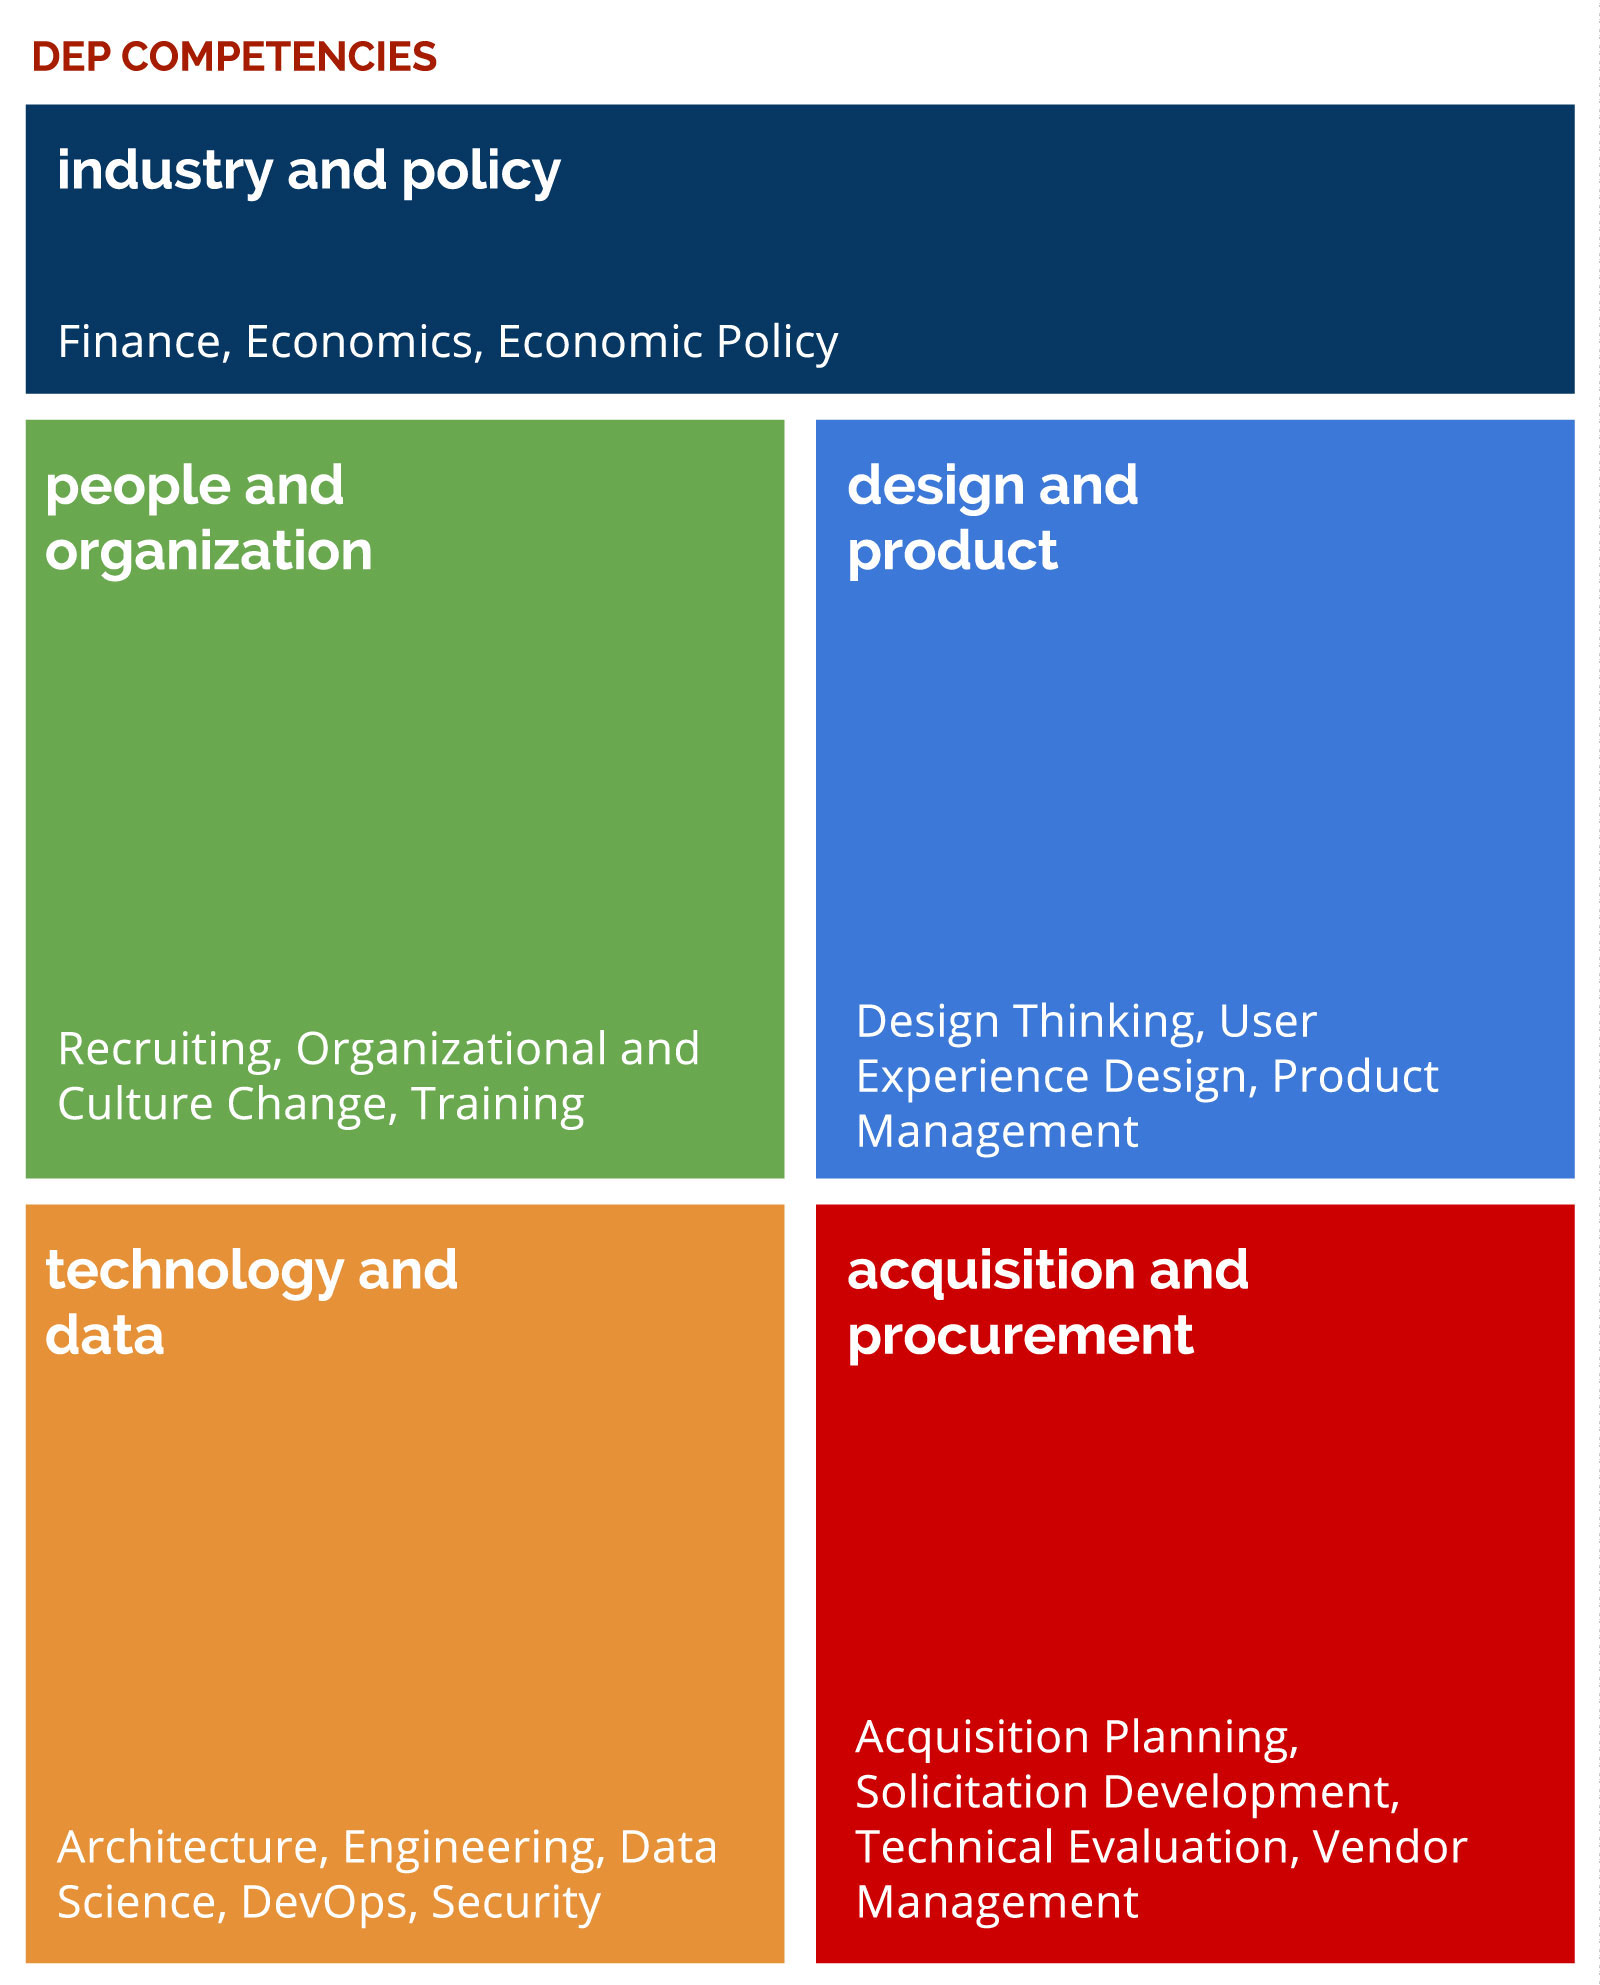 The Digital Economy Practice competencies include industry and policy, people and organization, design and product, technology and data, and acquisition and procurement.